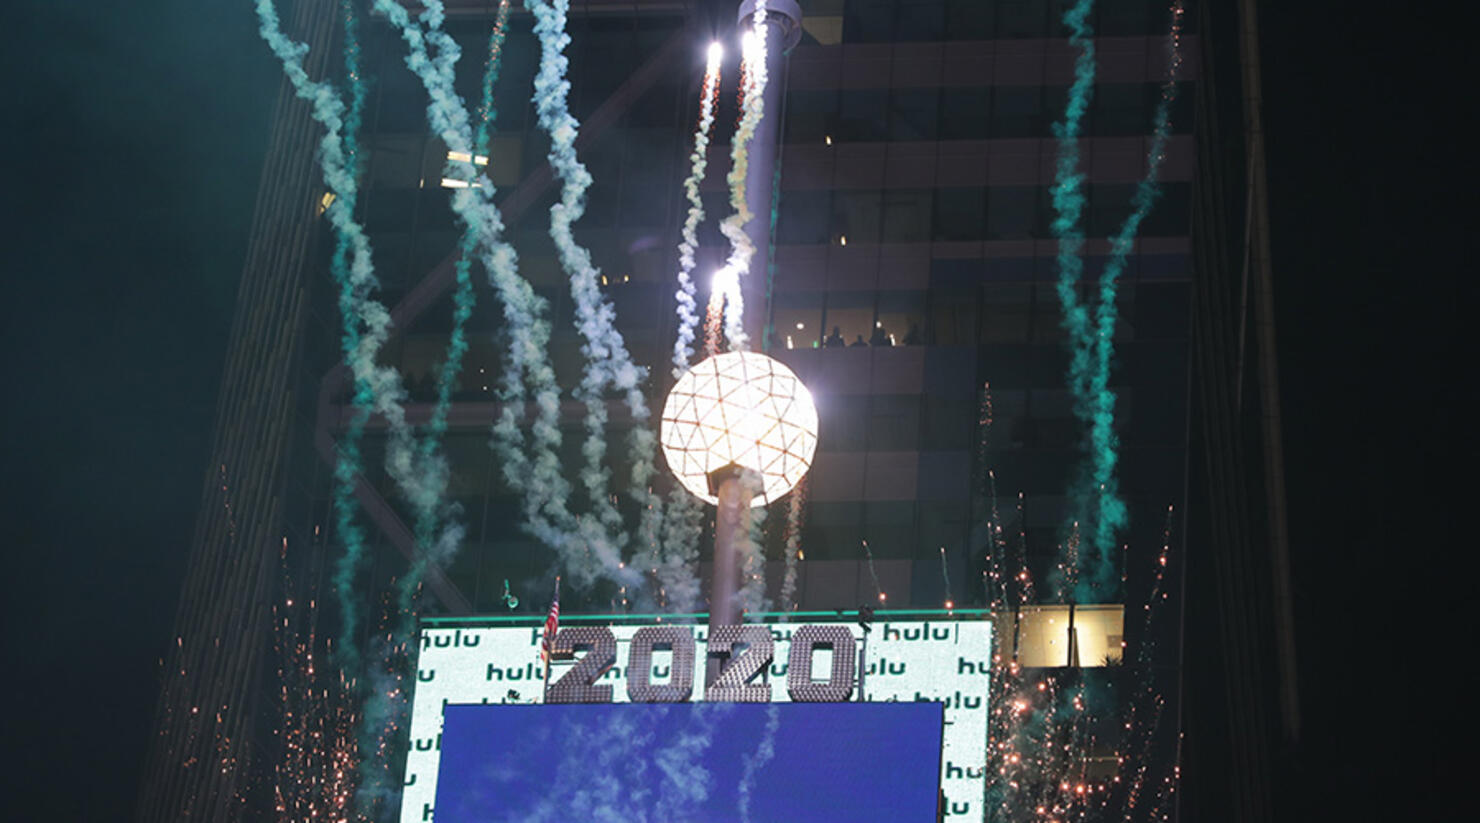 New Year’s Eve Ball Drop In Times Square Is Going Virtual This Year